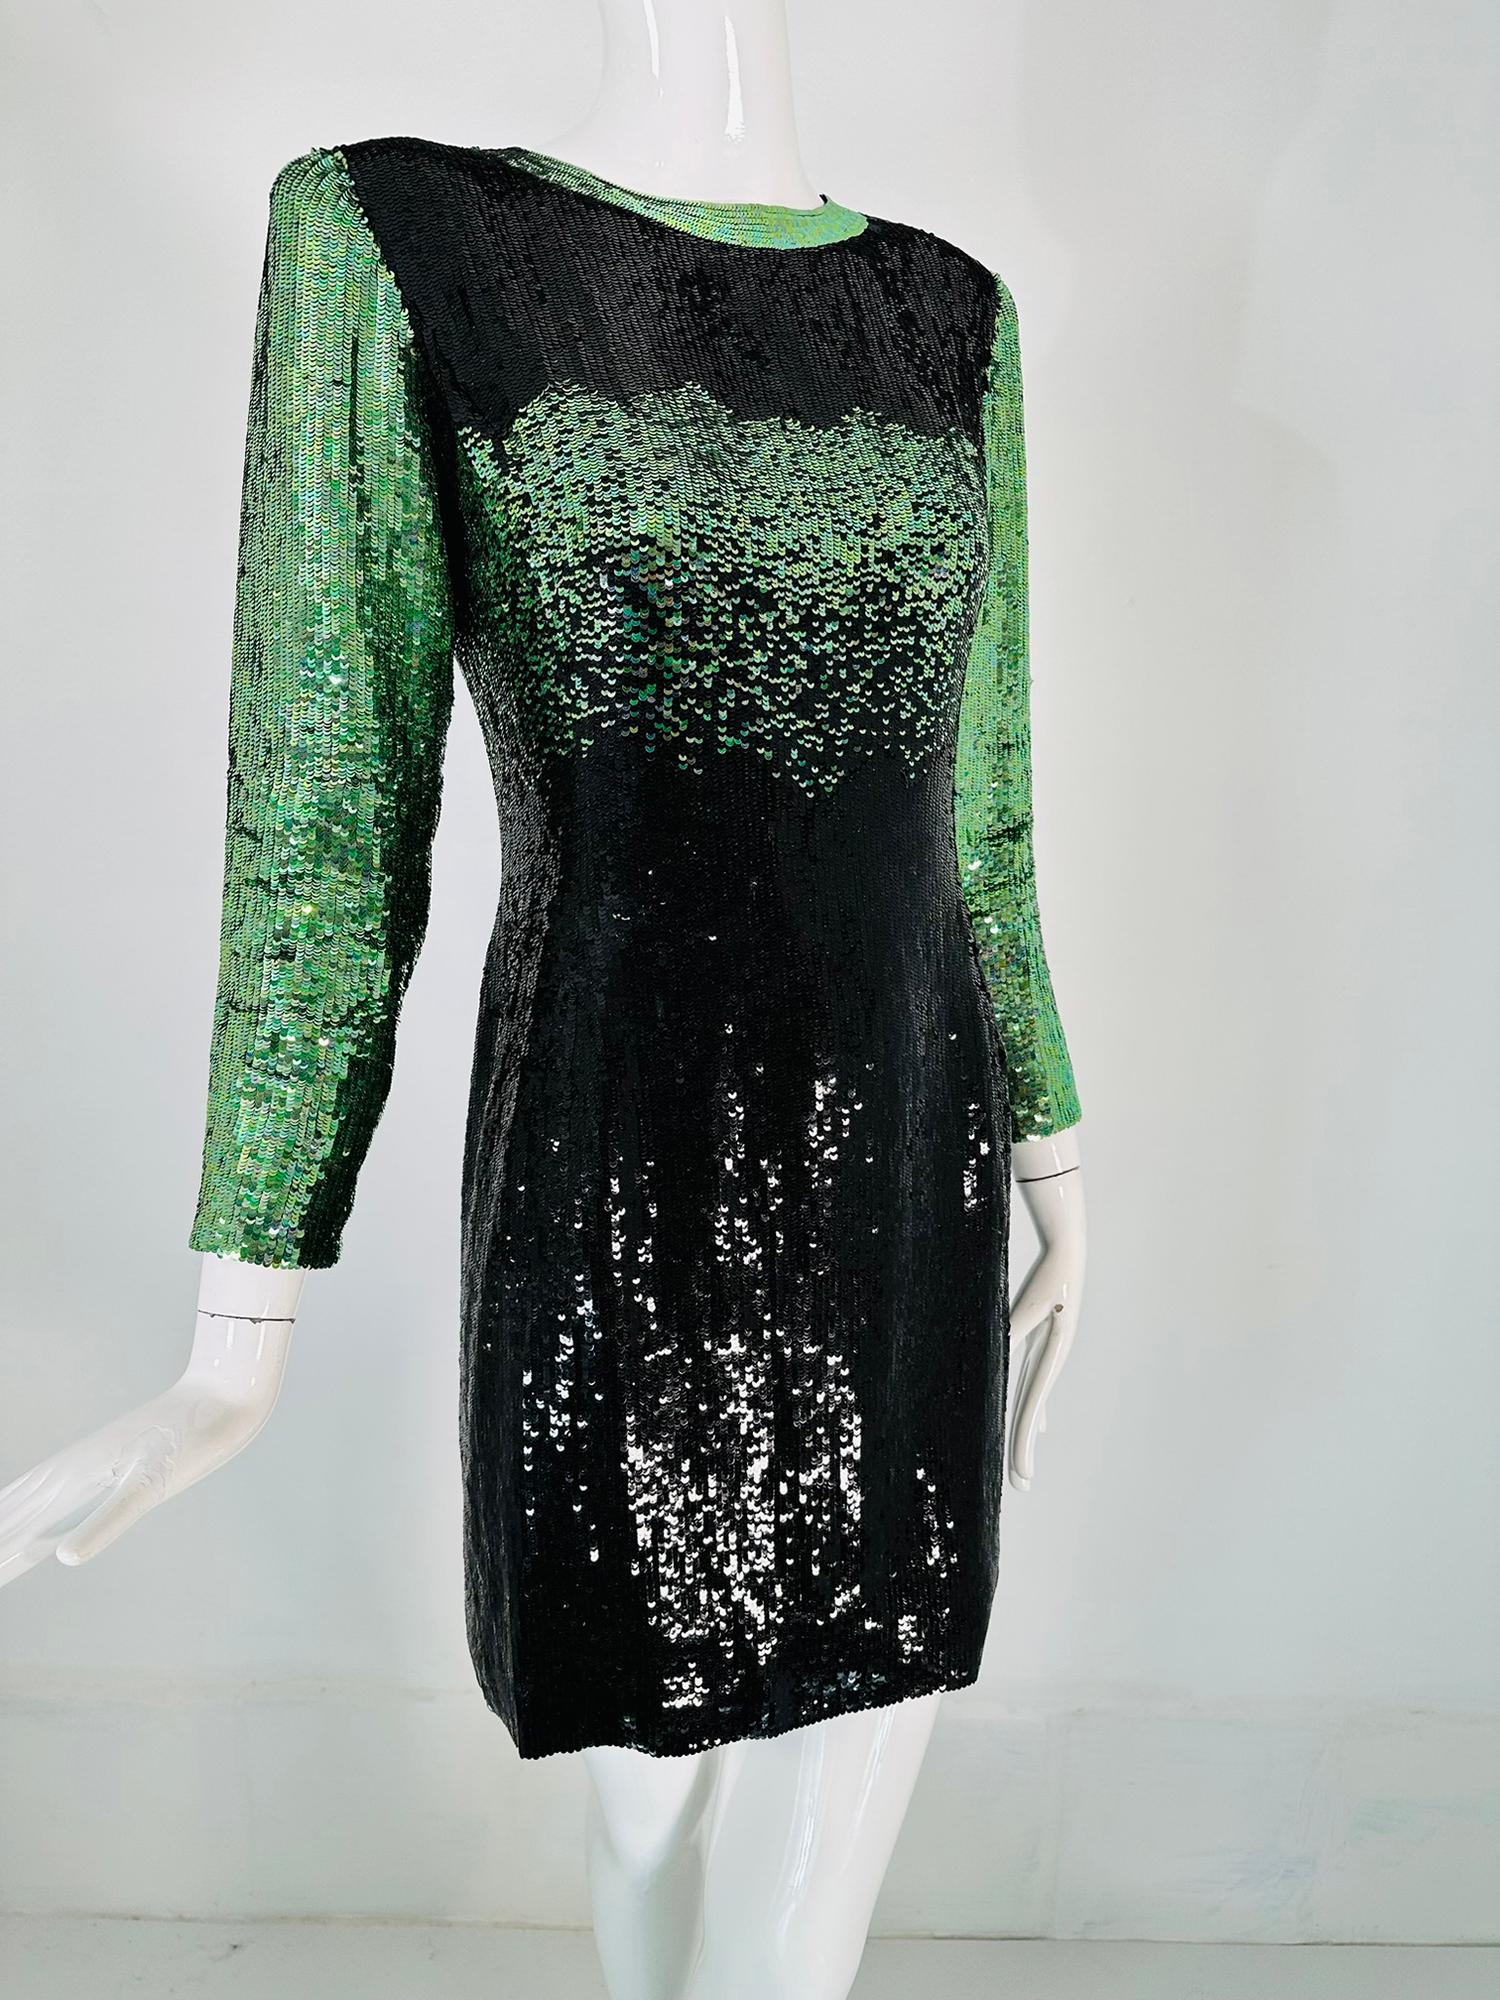 Neil Beiff black & green totally sequined cocktail dress. Take center stage at your next evening event in this sparking dress from Neil Beiff. Every surface is covered in glittering sequins. Round neckline dress with long sleeves and a straight cut